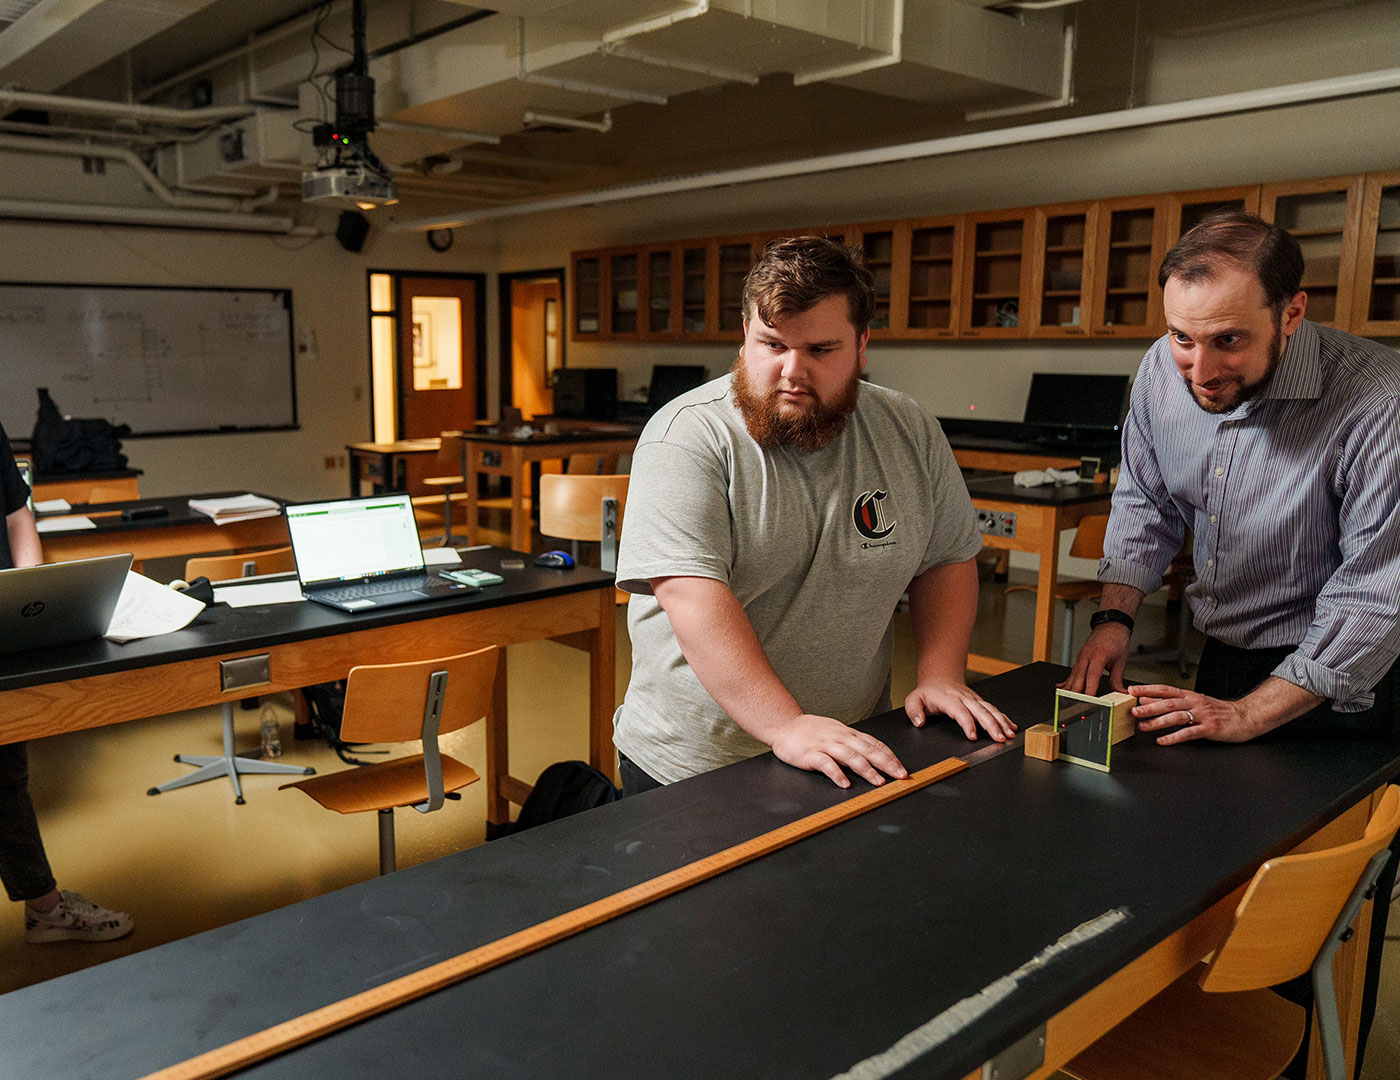 Dr. Dan Pitonyak works with student in the physics lab.